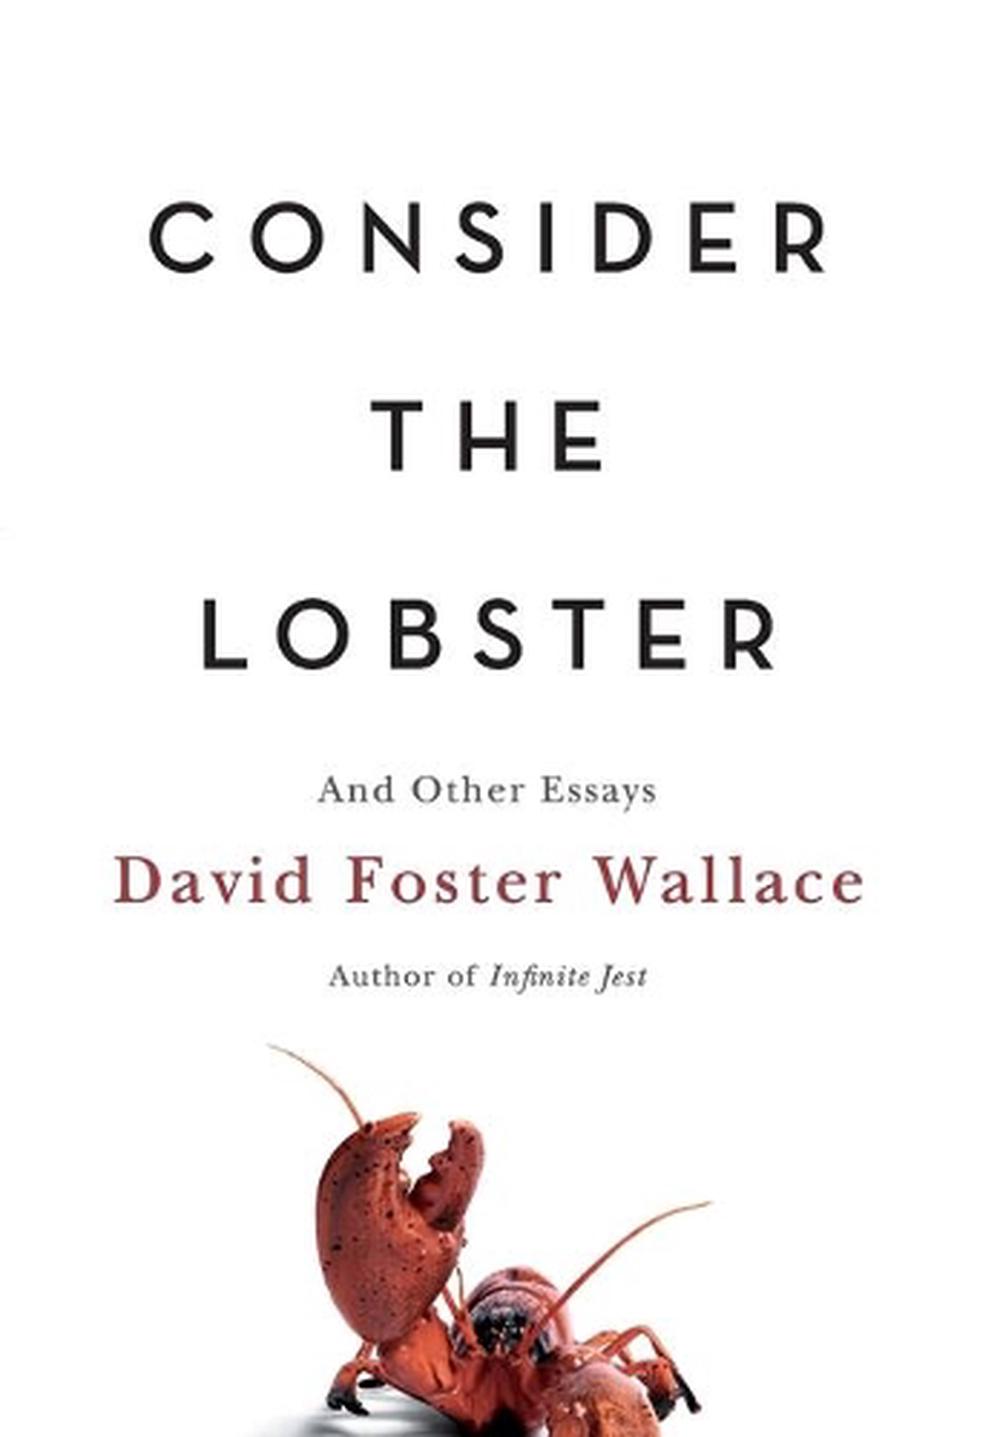 david foster wallace consider the lobster essays